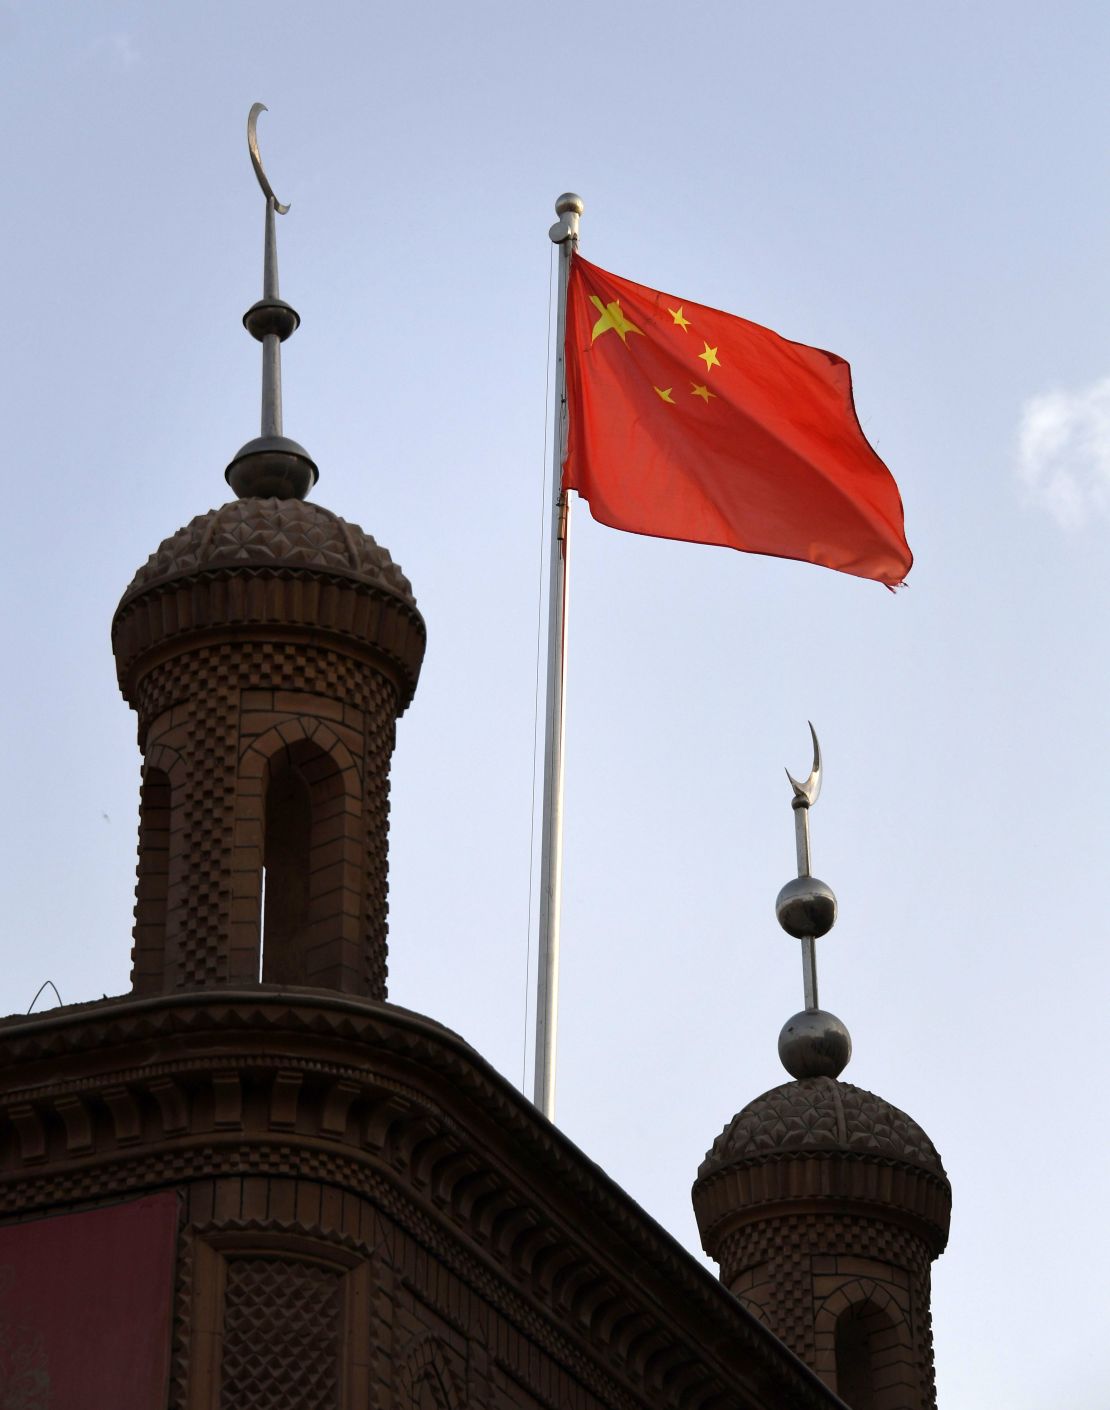 The Chinese flag flies over the Juma mosque in the restored old city area of Kashgar, in China's western Xinjiang region, on June 4, 2019.